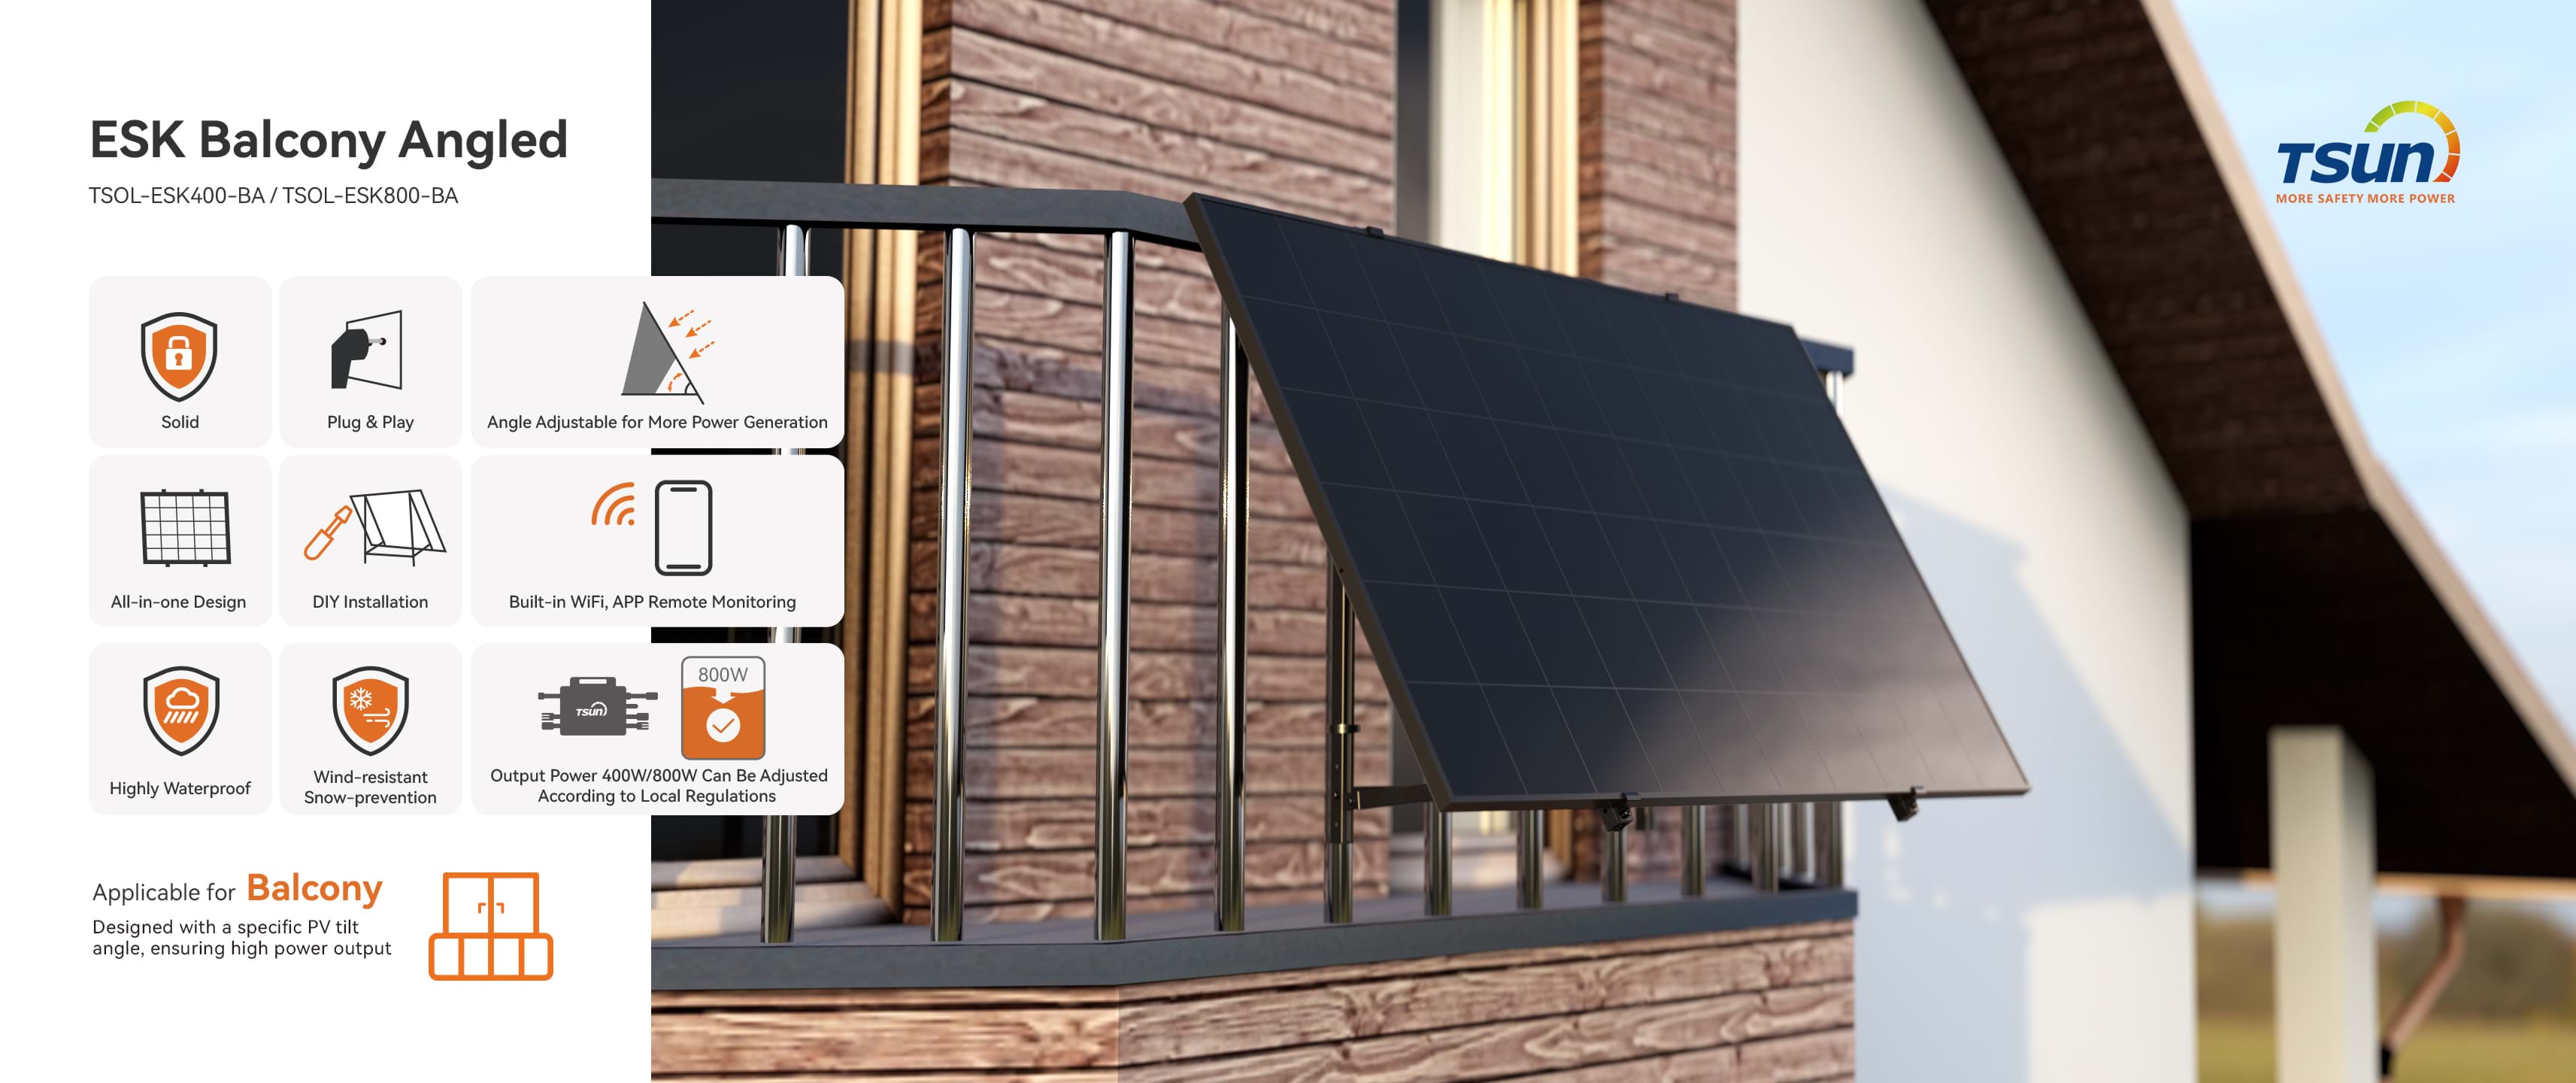 Empower Your Balcony, Harness the Sun with Easy Solar Kit - TSUN